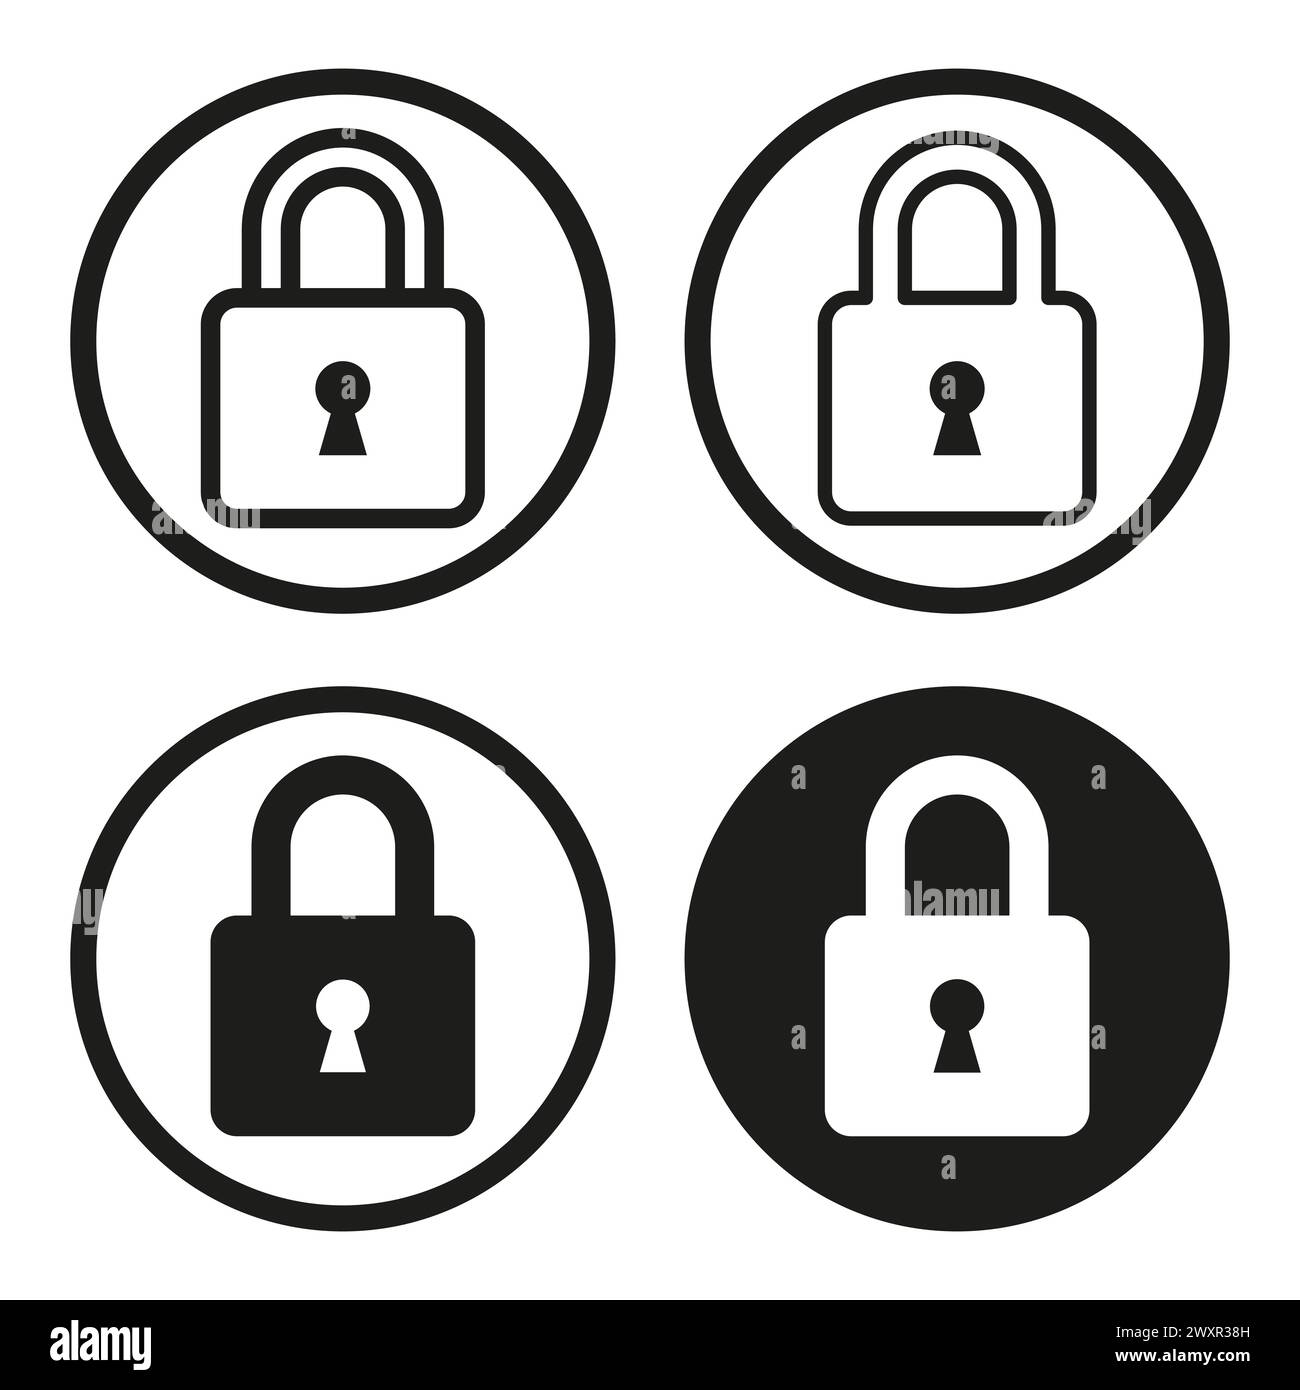 Padlock icons set. Security and protection symbols. Vector illustration. EPS 10. Stock Vector